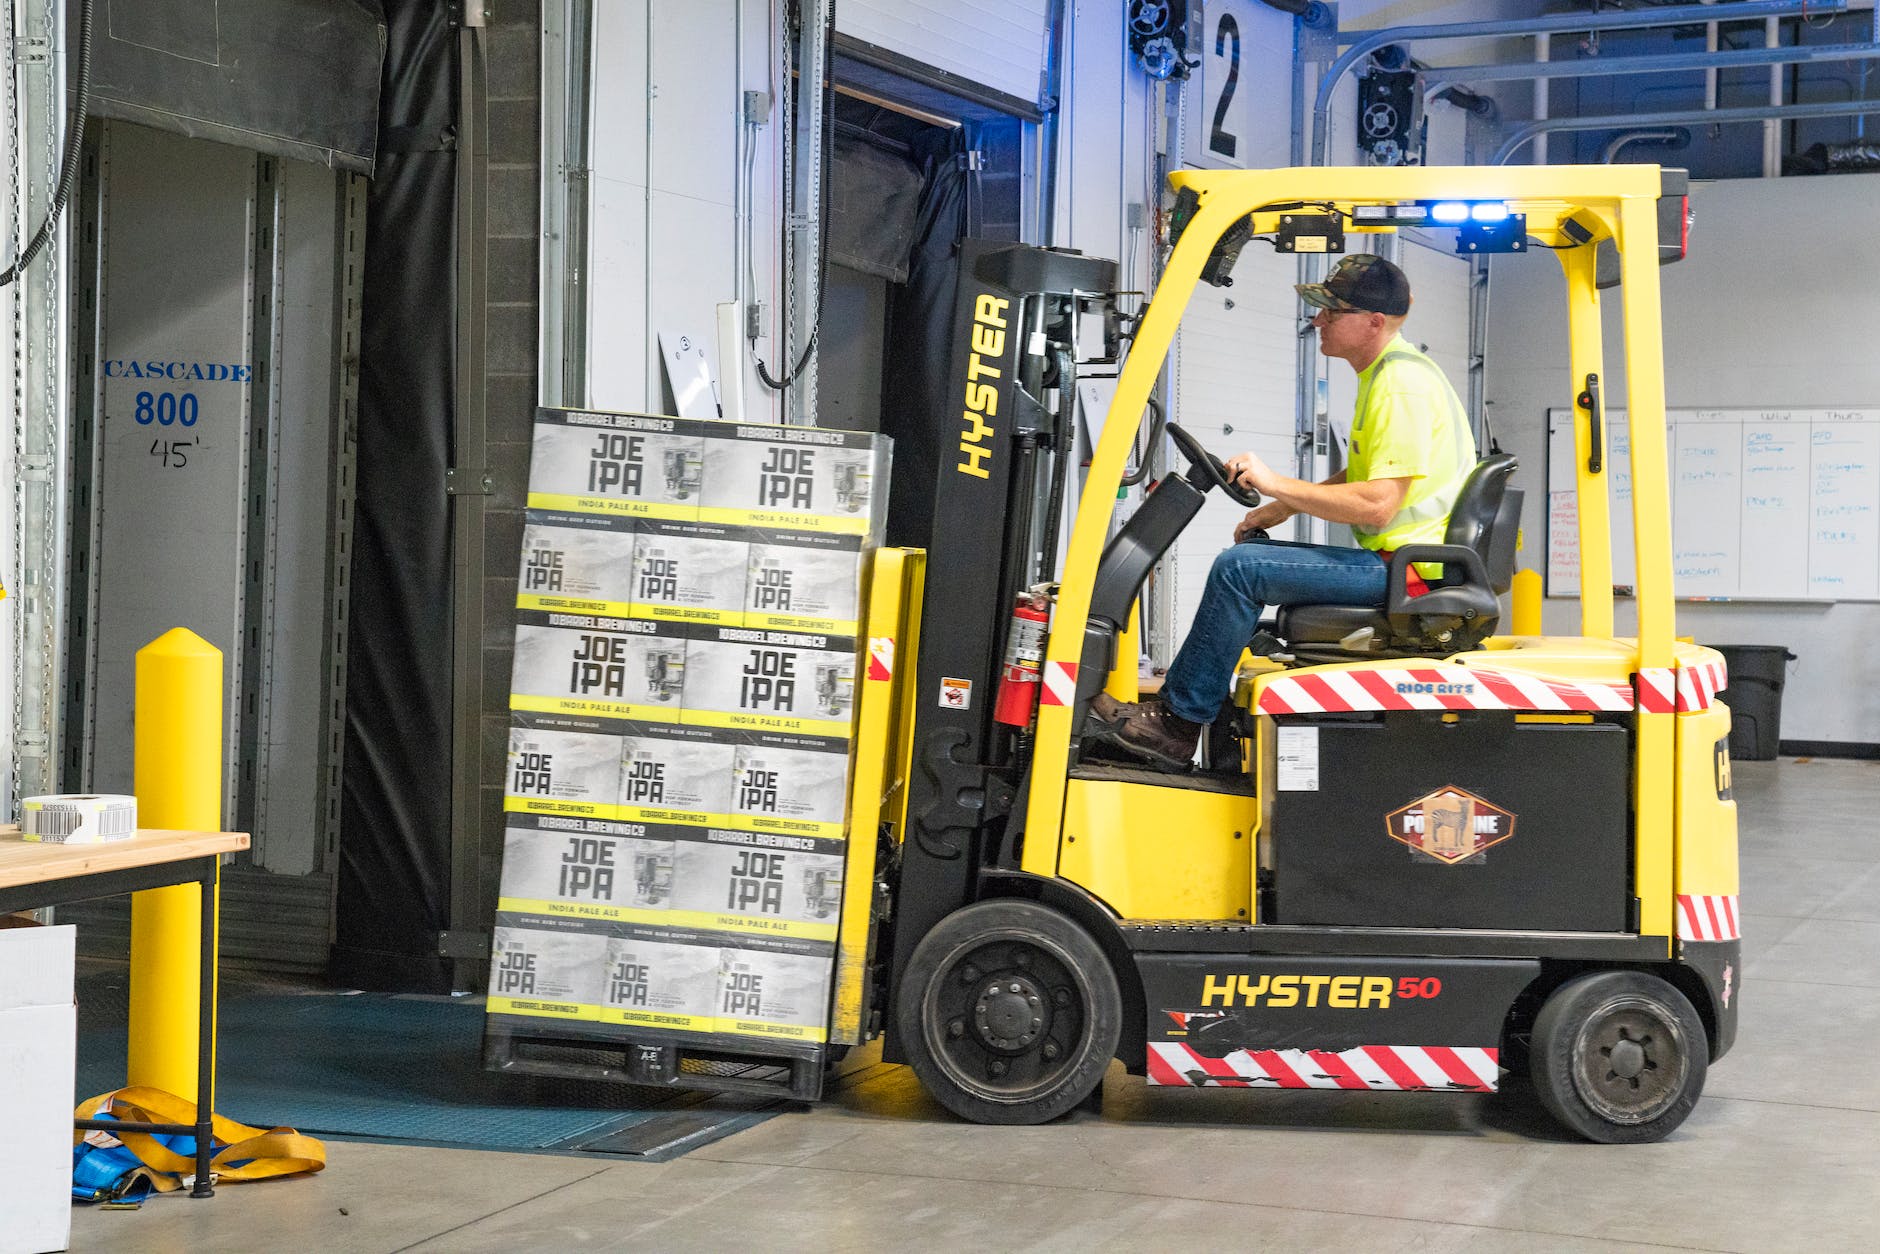 Forklift Safety: Training and Operation